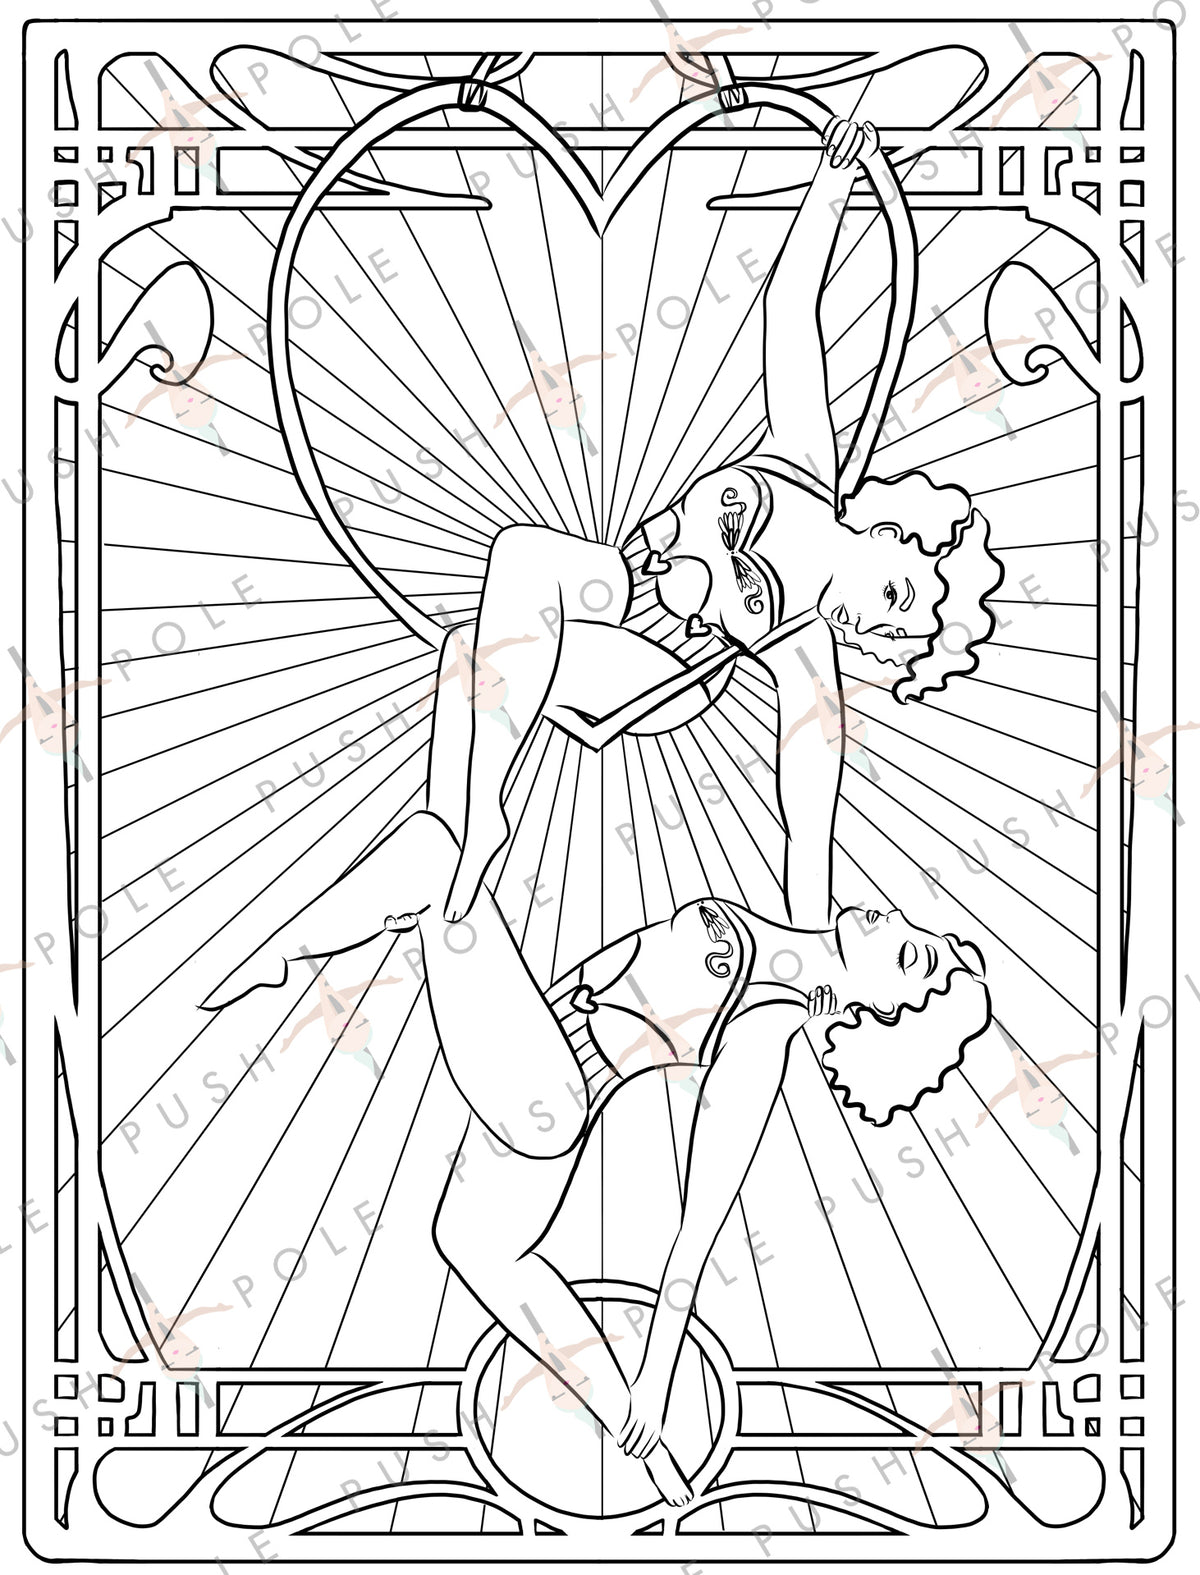 Doubles Hoop Lyra Circus Valentines Aerialist Digital Coloring Page 8.5" x 11"